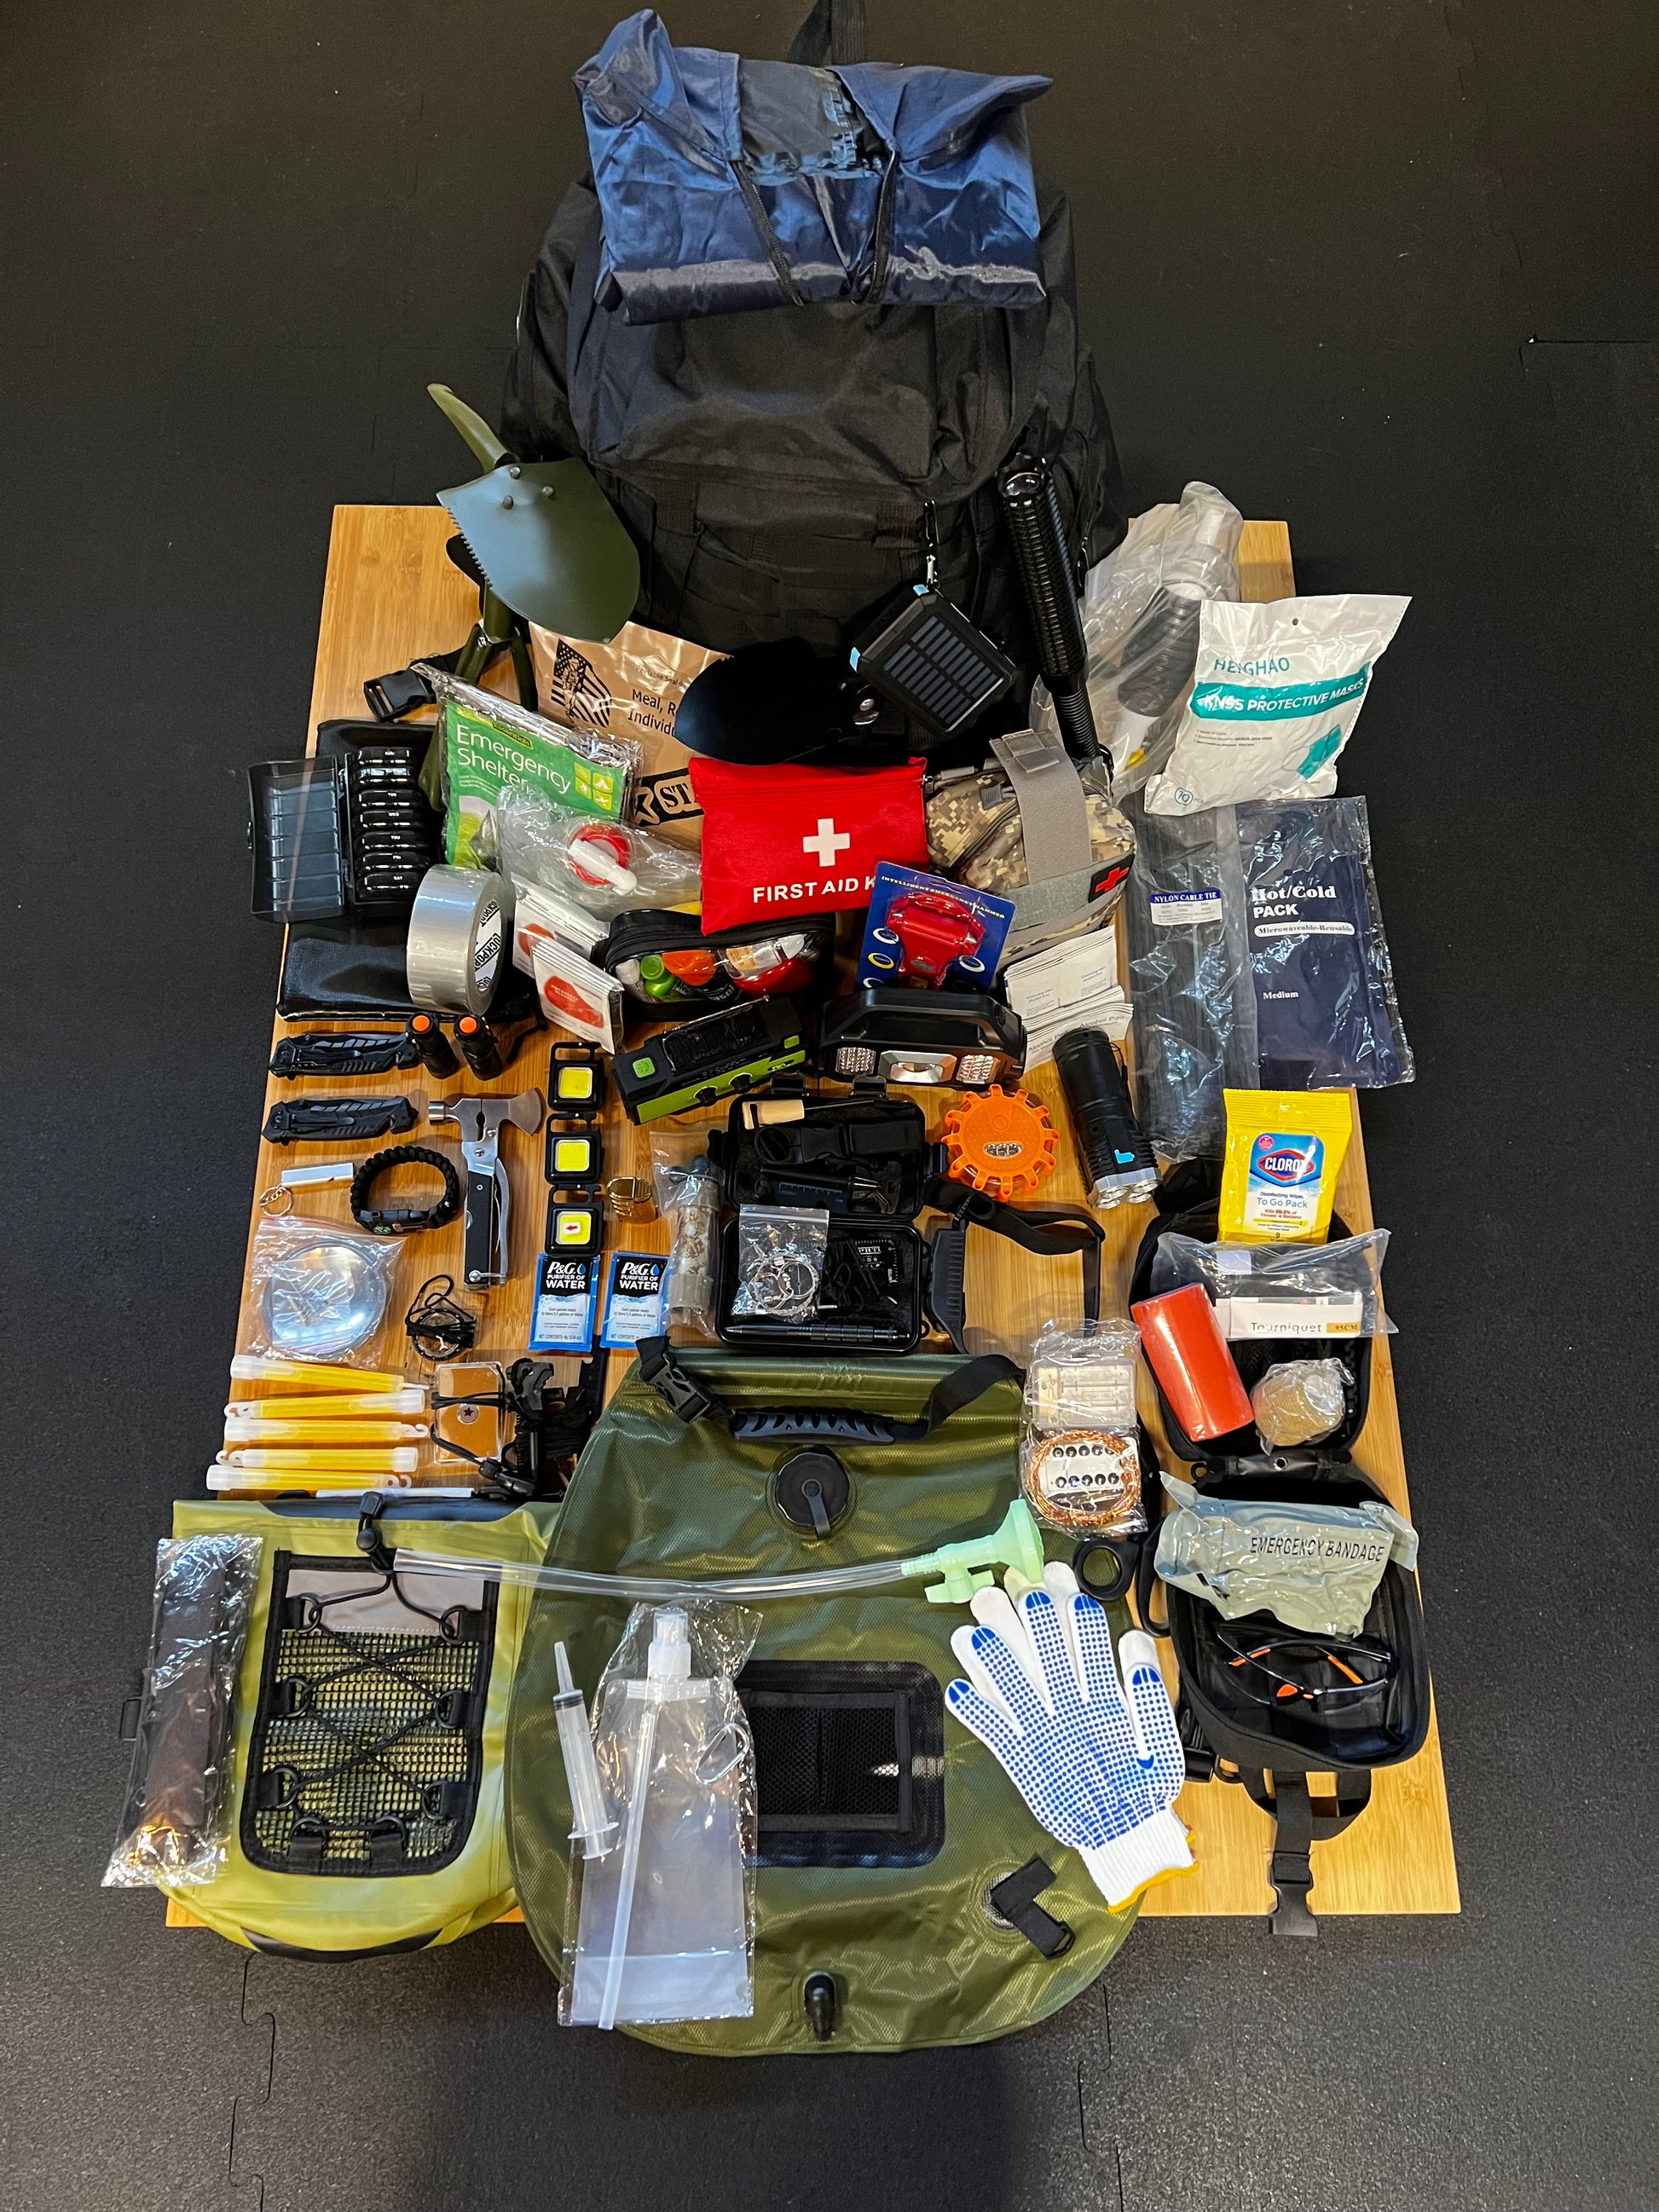 72 hour readiness and bugout bag